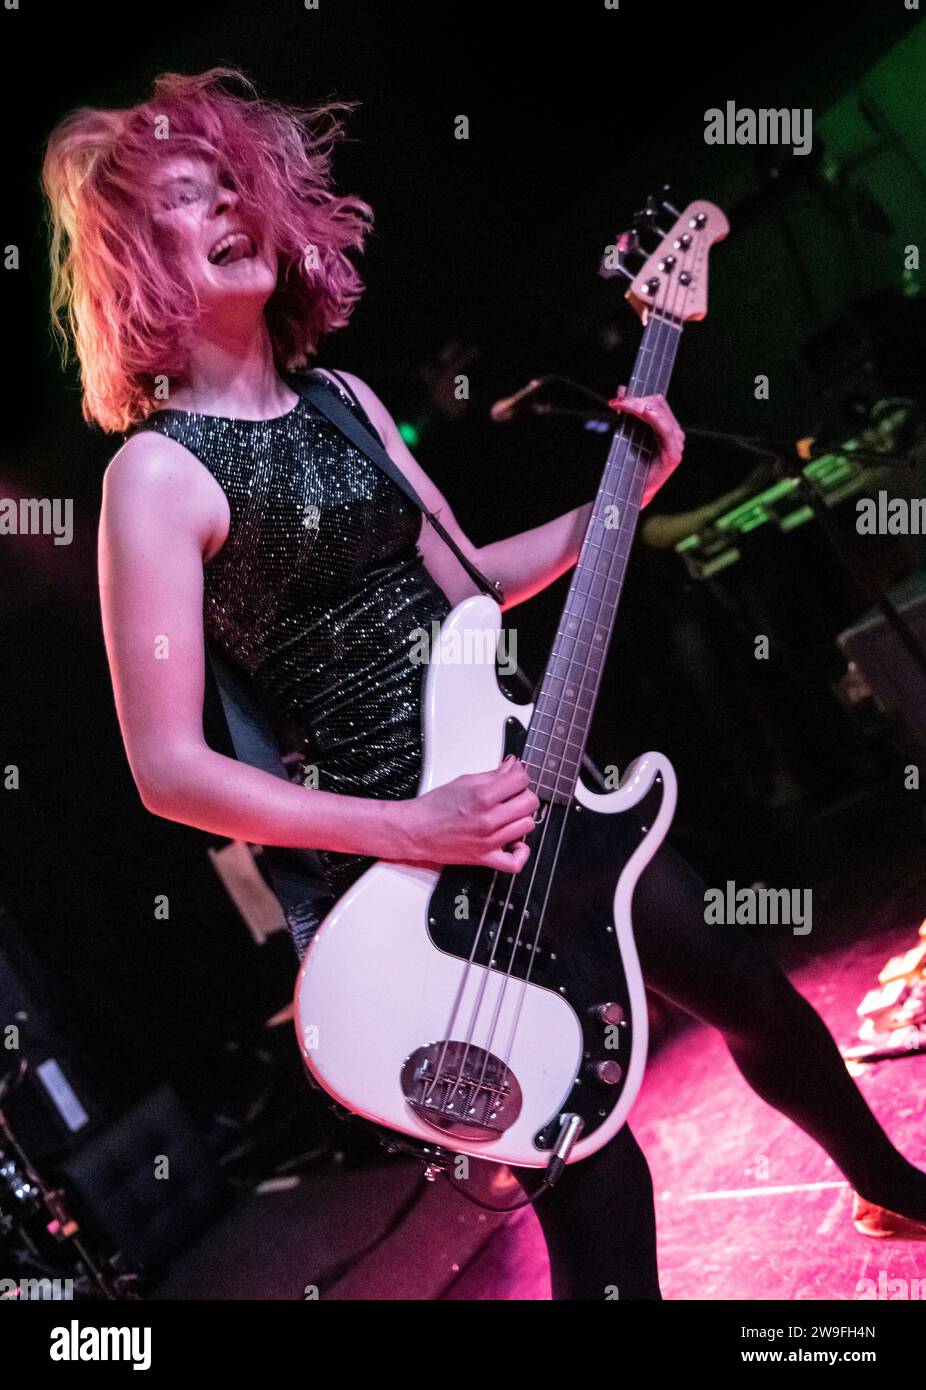 Charlotte Cooper, bassist of The Subways, live on stage - Birmingham O2 Institute 3, 2015 Stock Photo